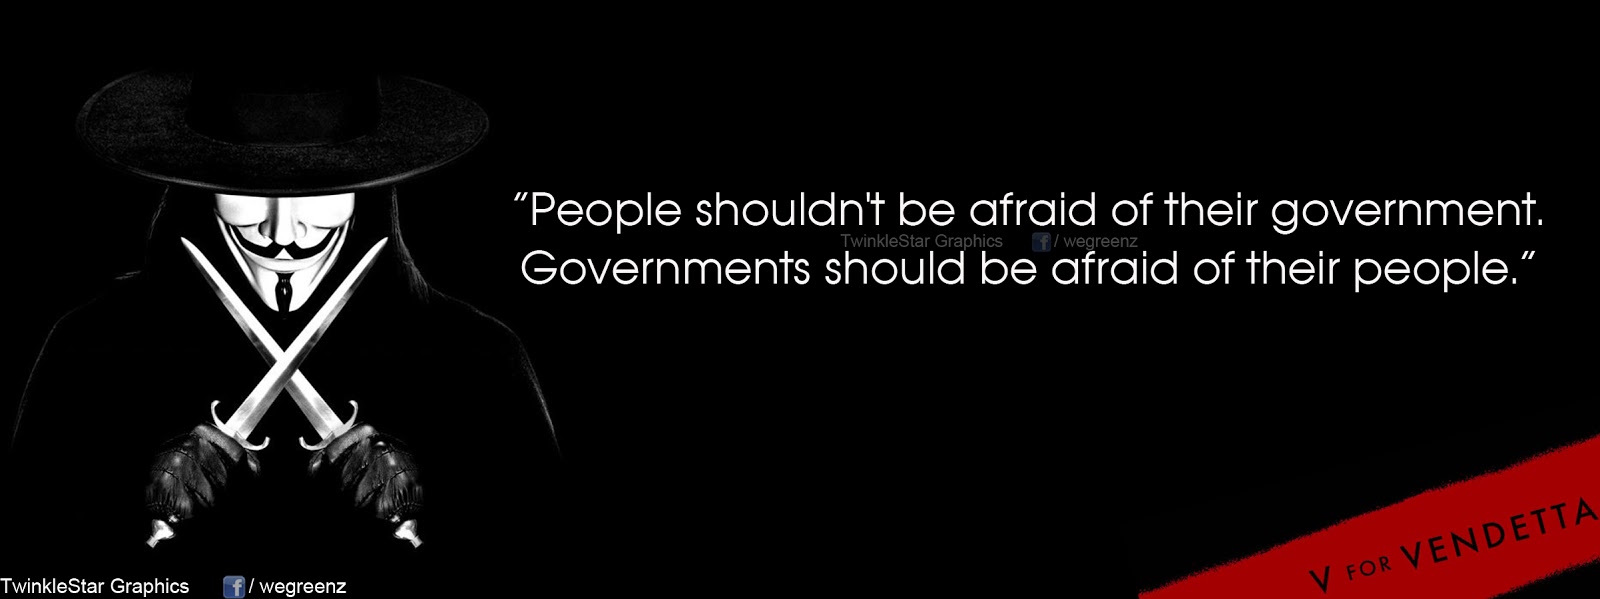 People Should Not Be Afraid of Their Governments Quote Movie T-shirt V For Vendetta